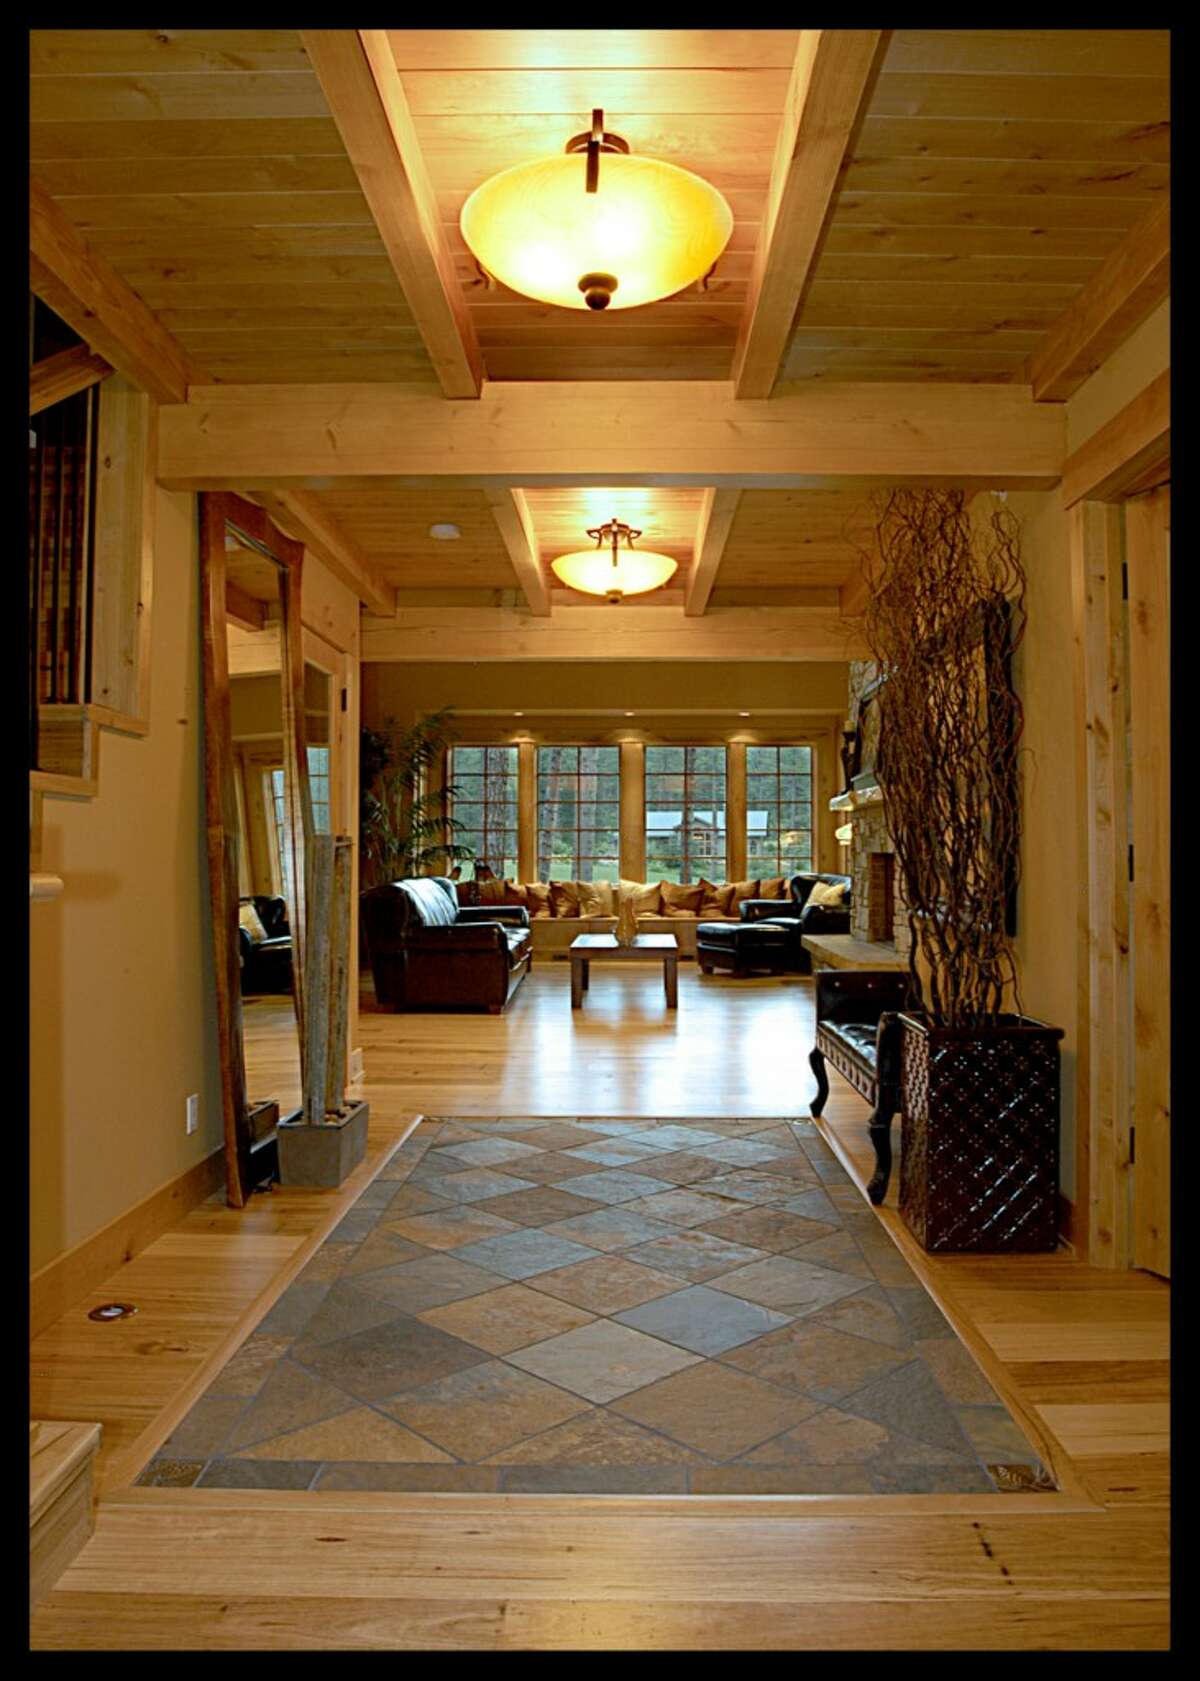 Entry of 741 Maple Leaf Loop, in Suncadia resort. The 3,823-square-foot home has four bedrooms, four bathrooms, wood ceilings with exposed beams, a two-story living room with a huge stone fireplace, a wine cellar, media room/office, reading loft, a two-car garage, patios and decks on a 0.41-acre lot at the 13th hole of Prospector Golf Course. And it has top-level 5-star certification under the Built Green green building program. It's listed for $1.25 million.